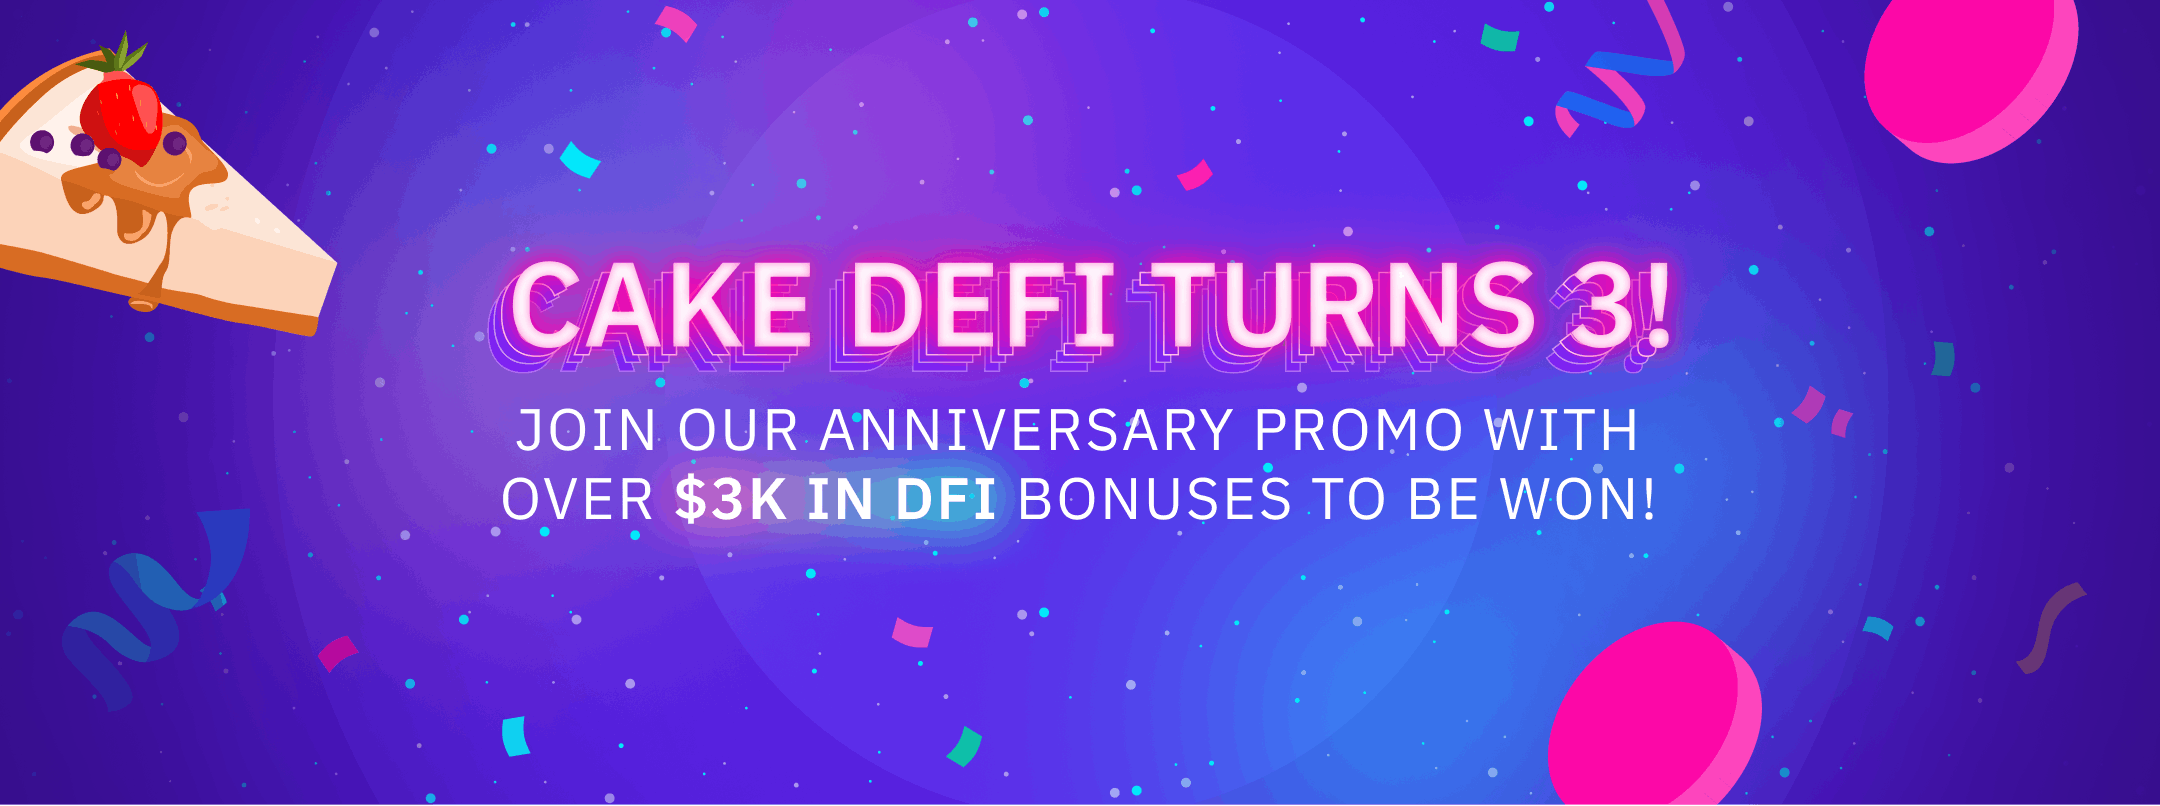 CAKE DEFI TURNS 3! Join Our Anniversary Promo 
With Over $3K in DFI Bonuses To Be Won!